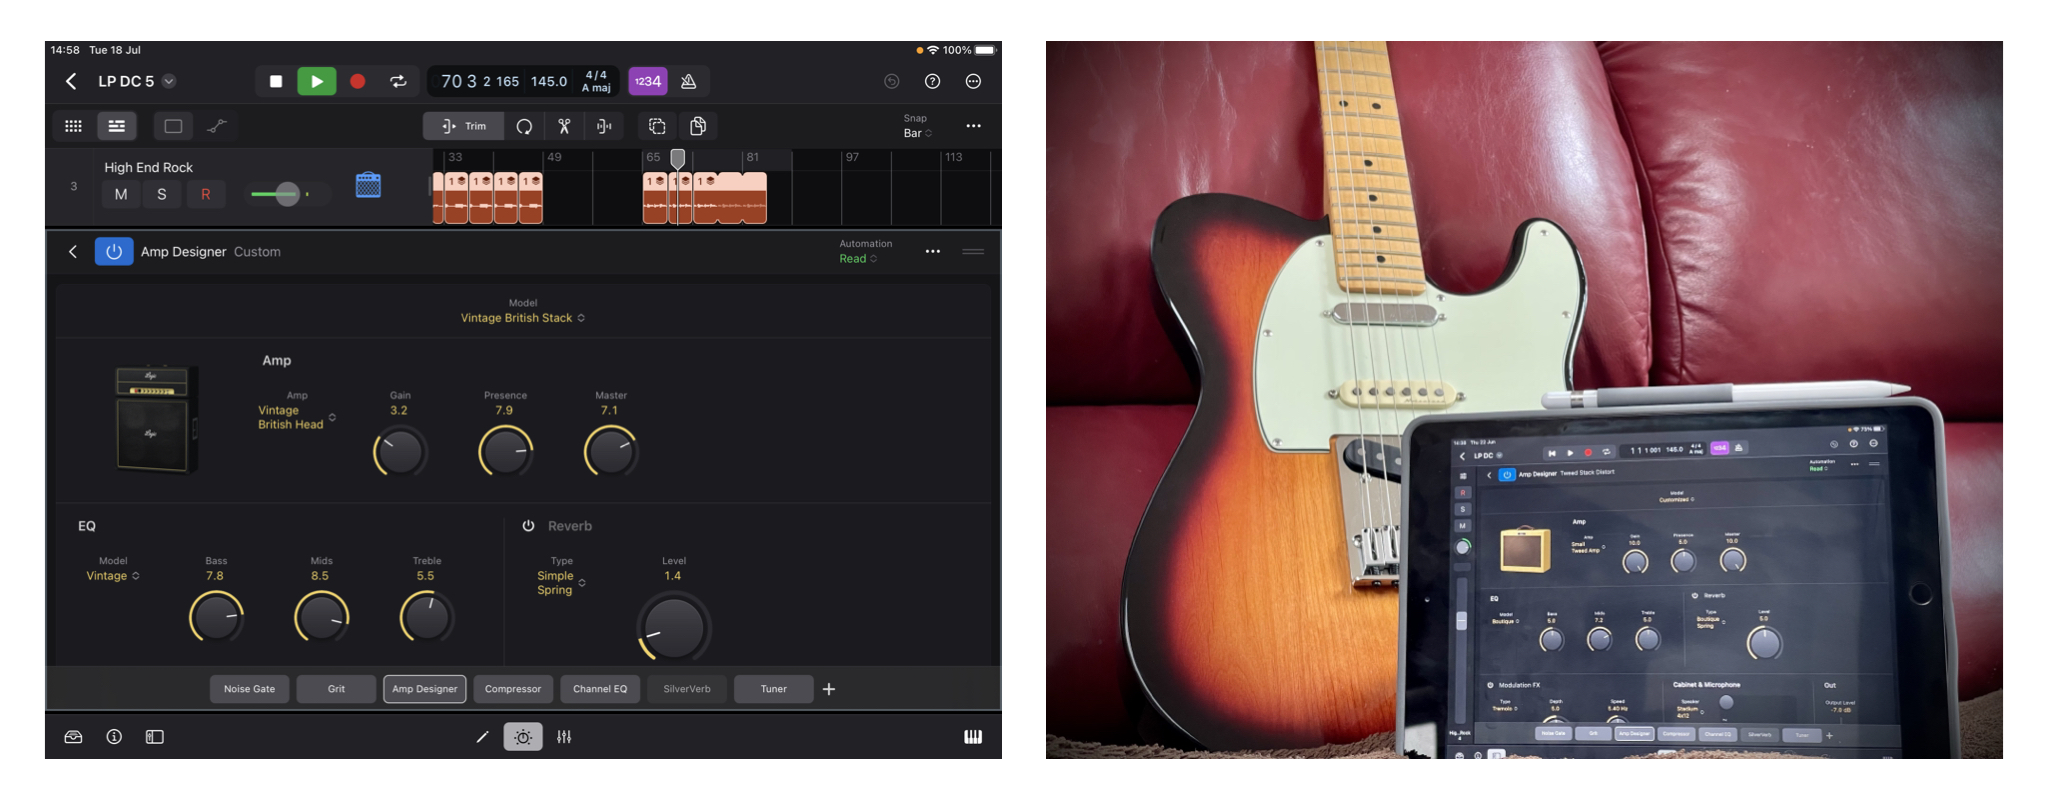 2 images: 1st - Amp Designer UI screenshot from Logic Pro for iPad, 2nd - photo of a guitar and iPad with Logic Pro onscreen.